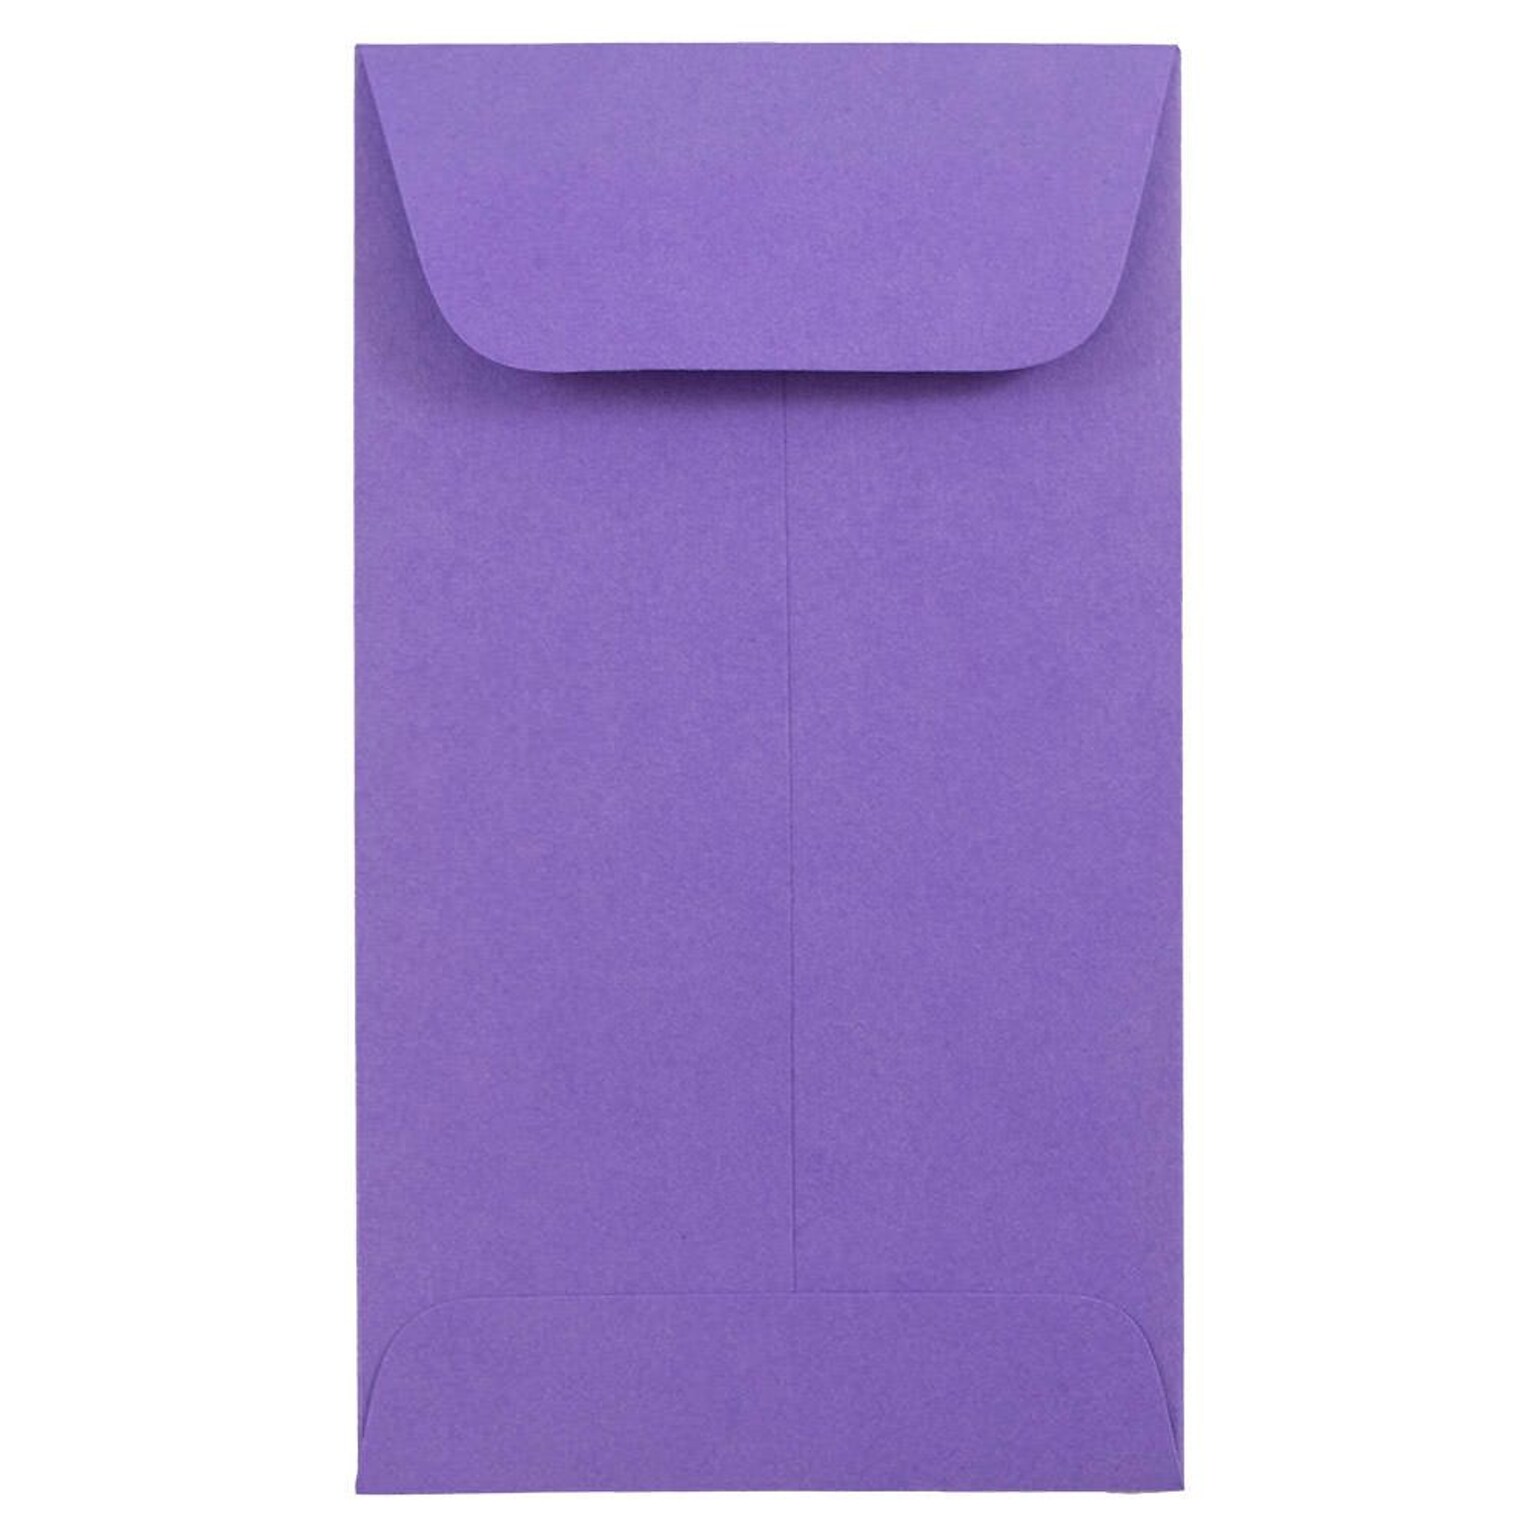 JAM Paper #5.5 Coin Business Colored Envelopes, 3.125 x 5.5, Violet Purple Recycled, 25/Pack (356730550)